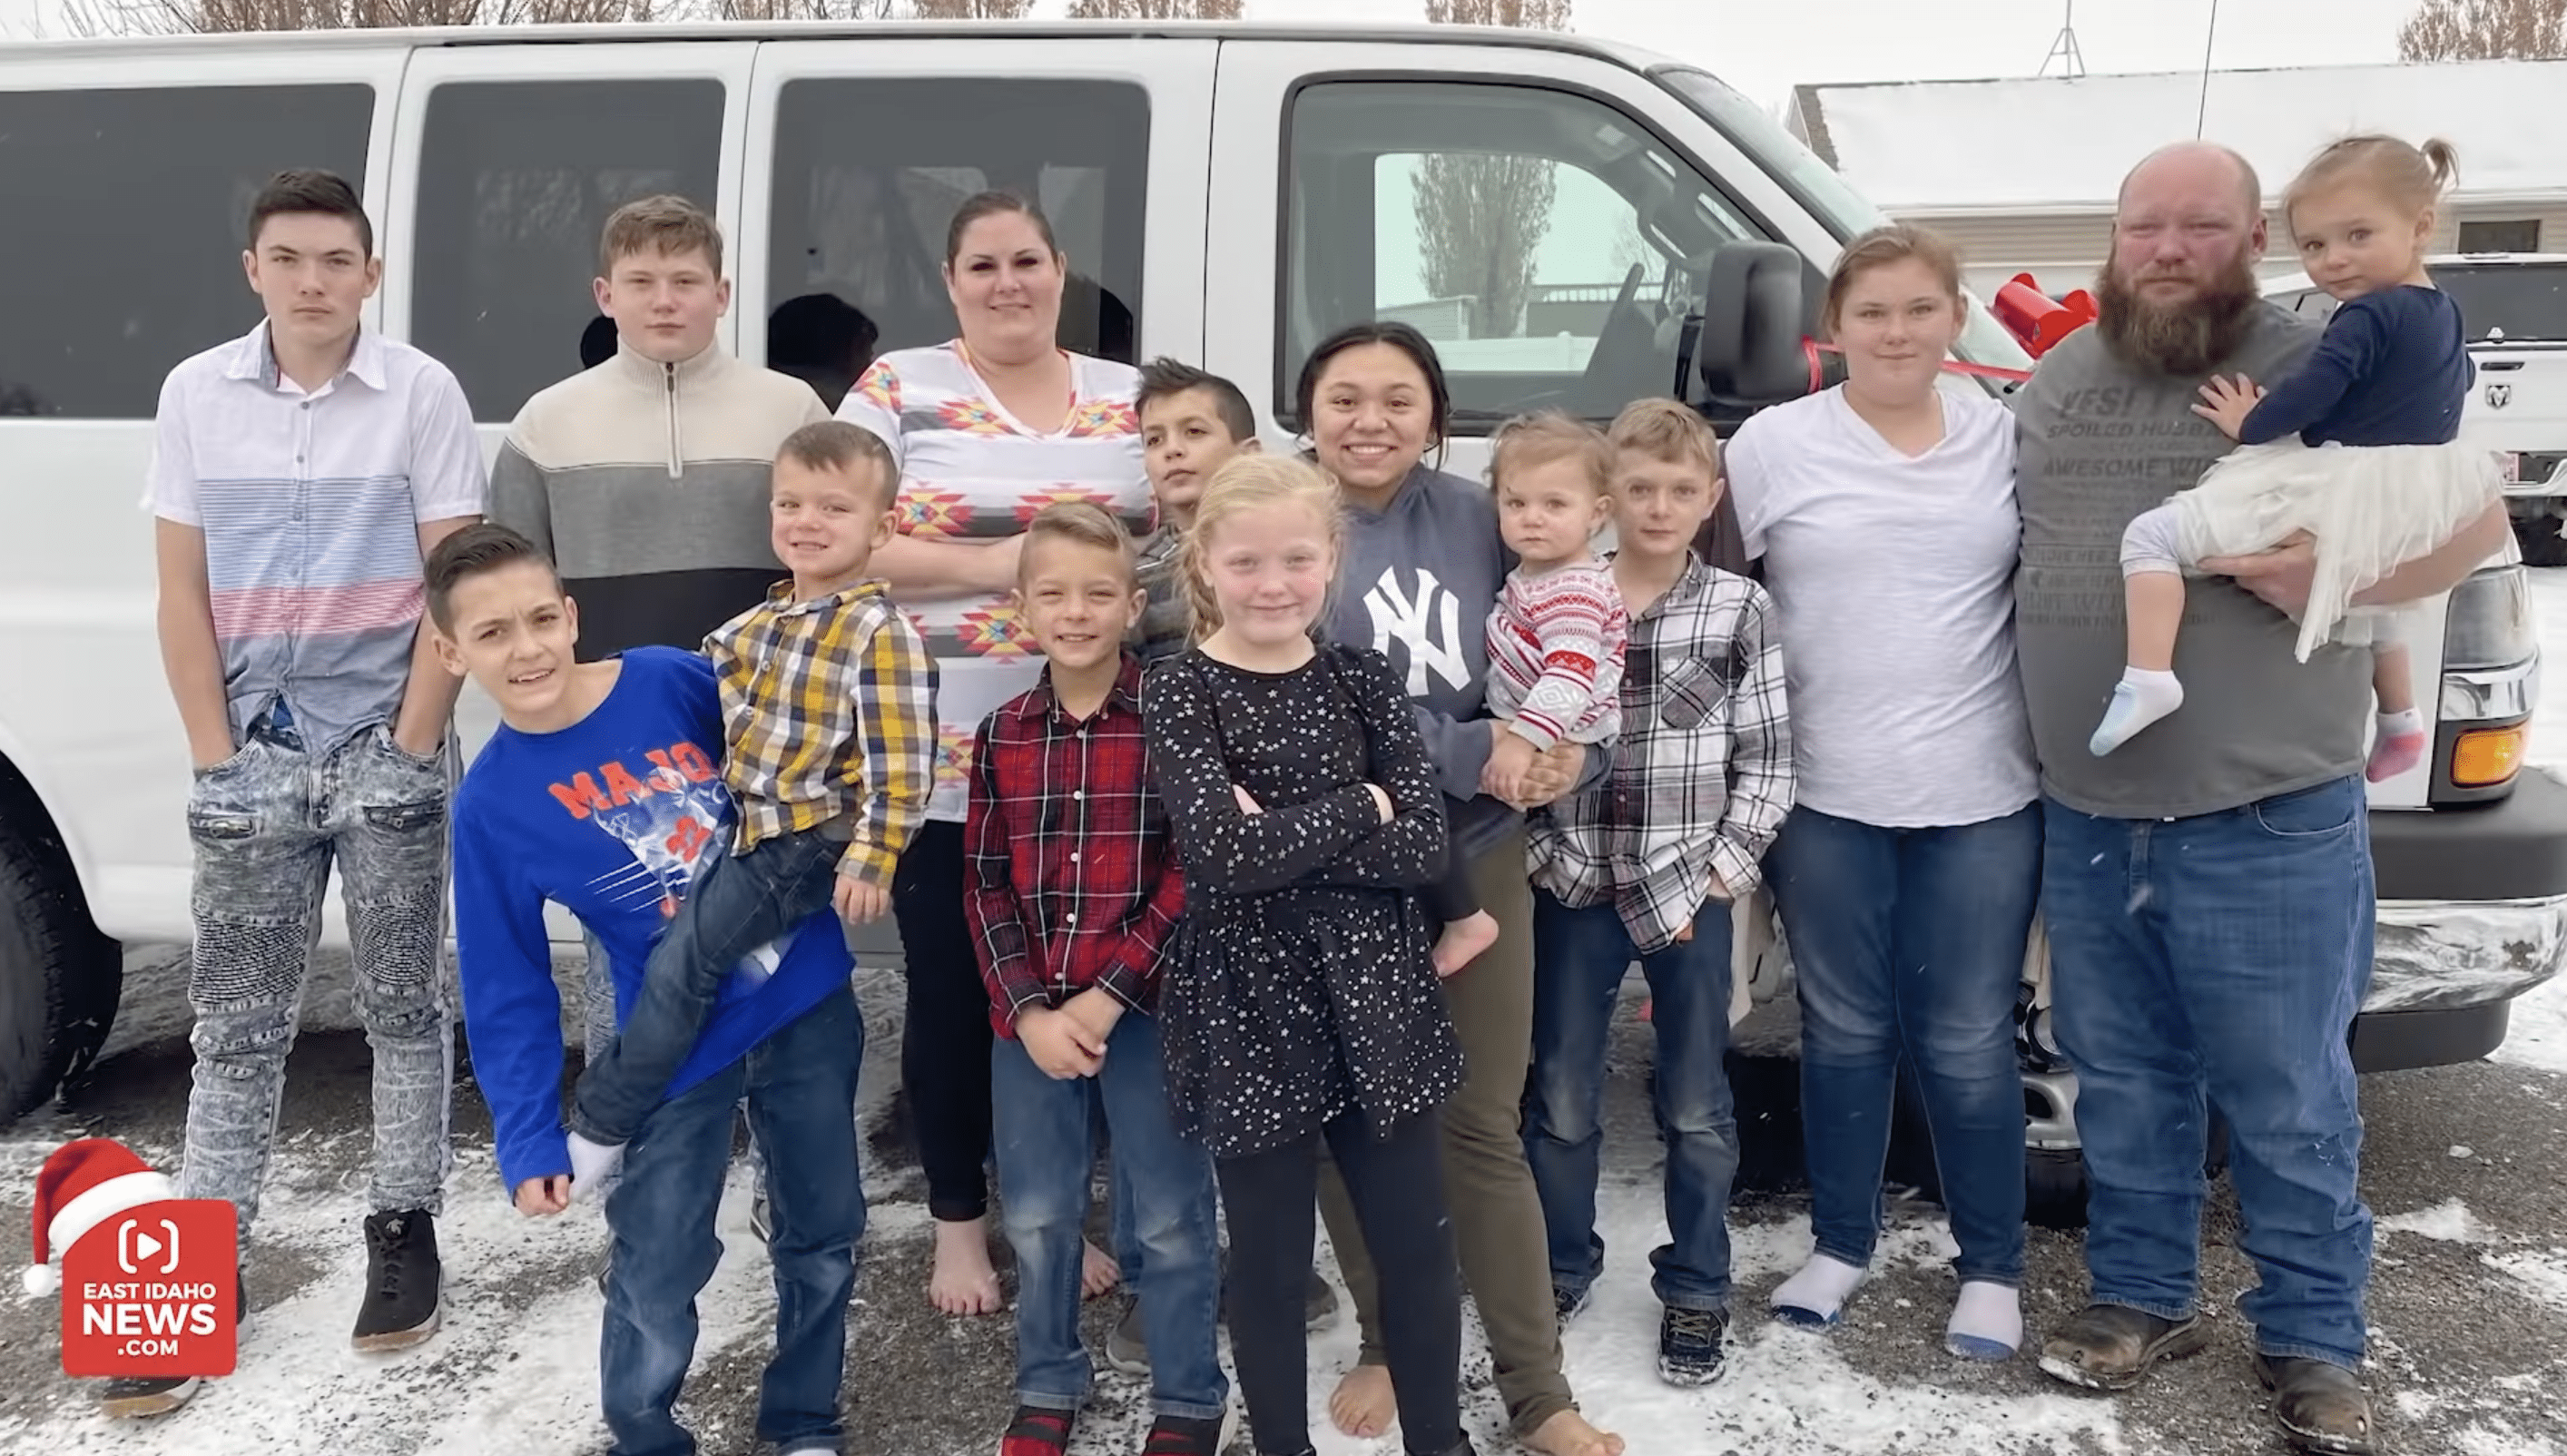 Ben and Misty Ashley with their 12 children. | Photo: YouTube.com/East Idaho News